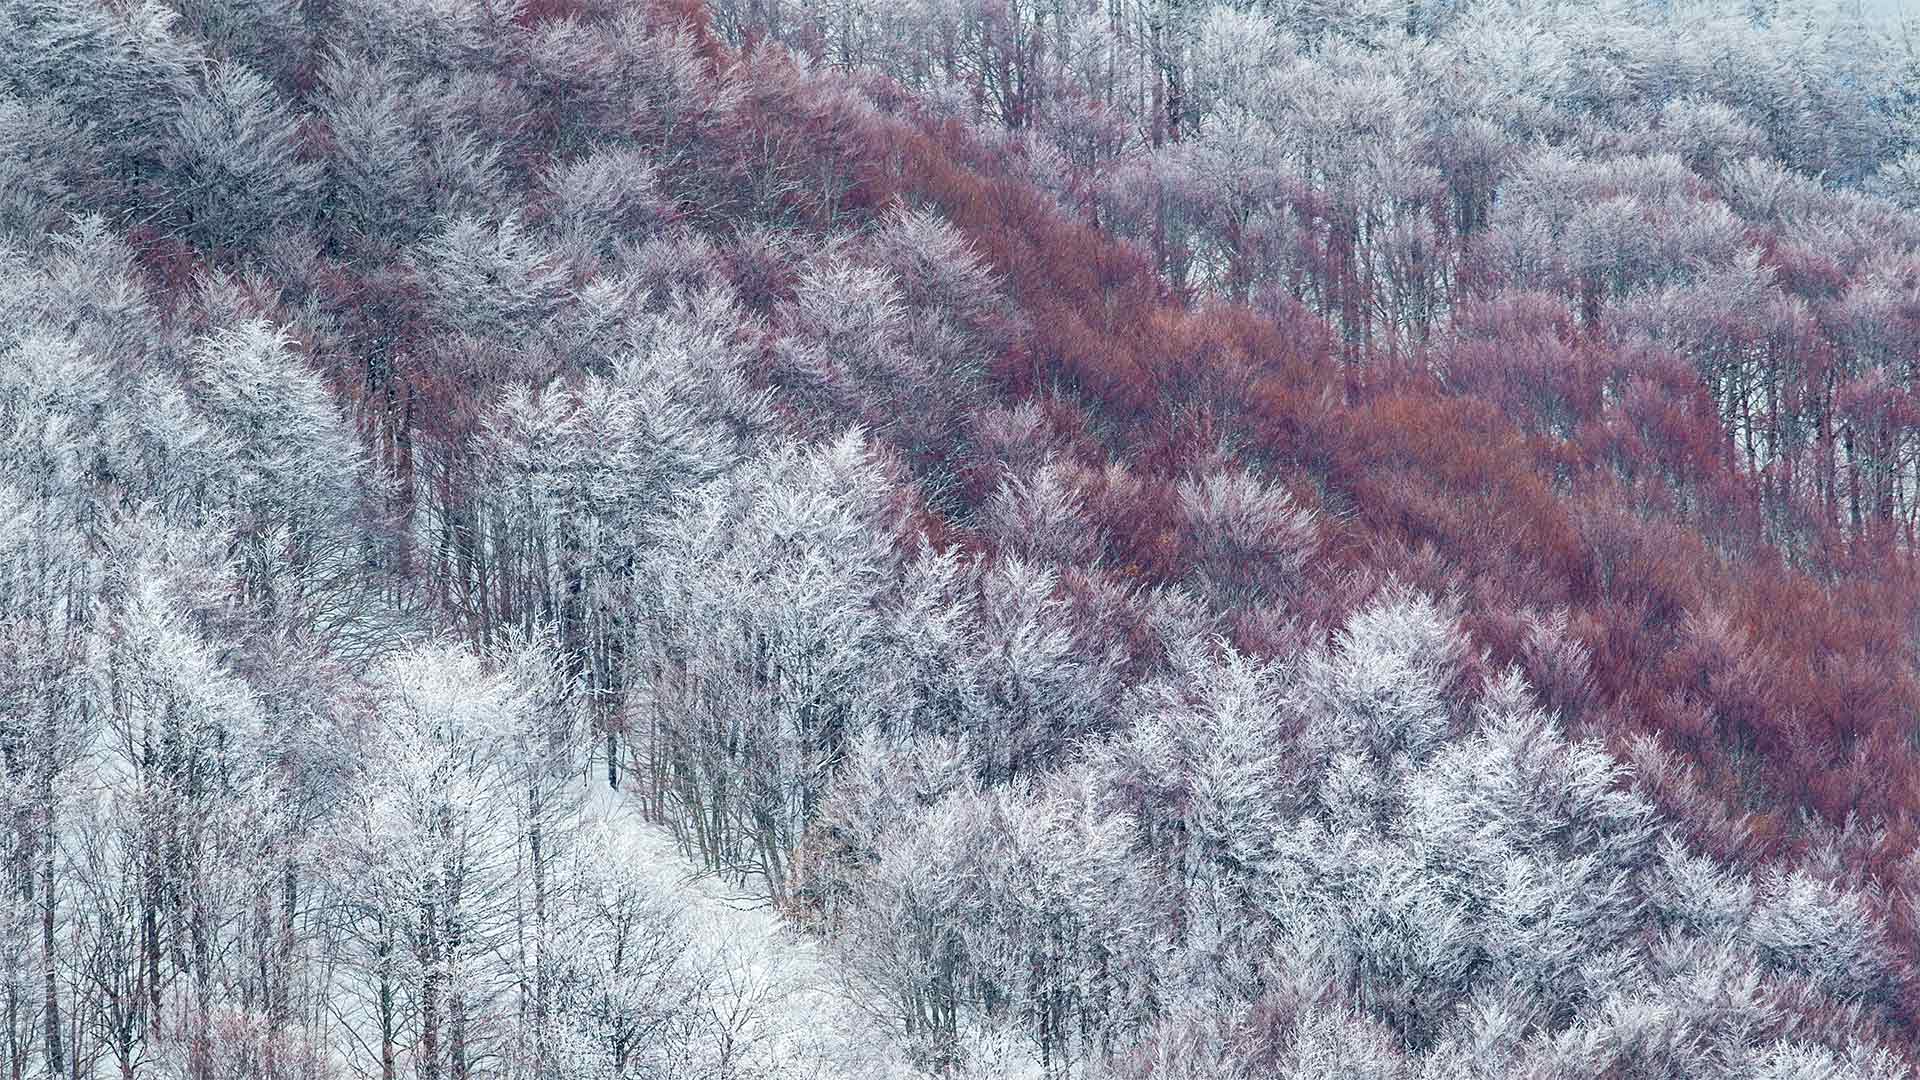 Partly snow-covered slope in Val Cervara, an old-growth beech forest, Abruzzo, Italy - Bruno D'Amicis